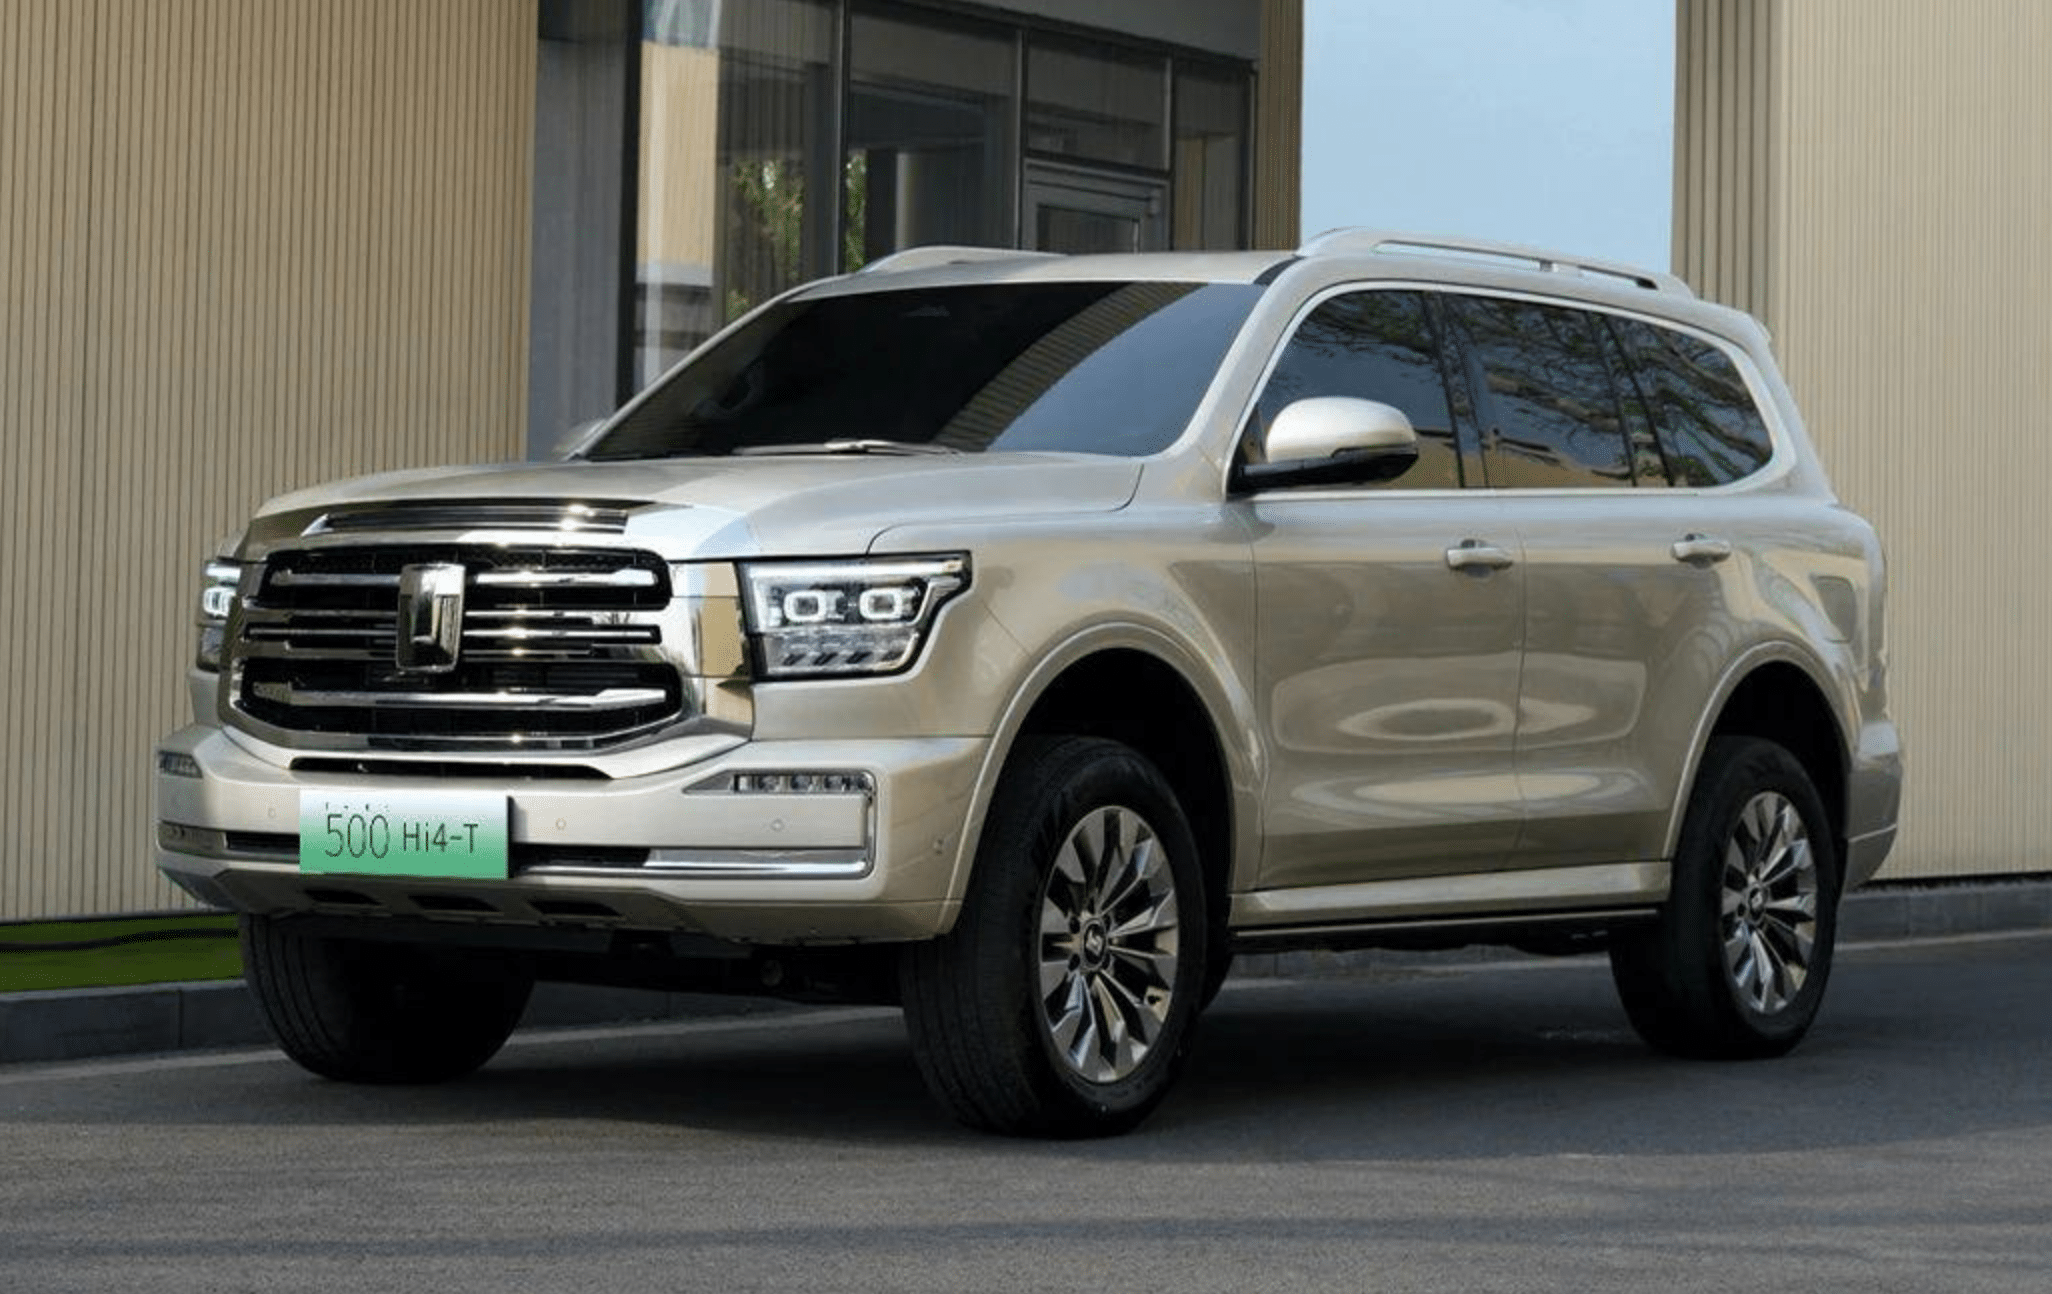 Great Wall Motor’s answer to Toyota Land Cruiser gets over 20,000 orders